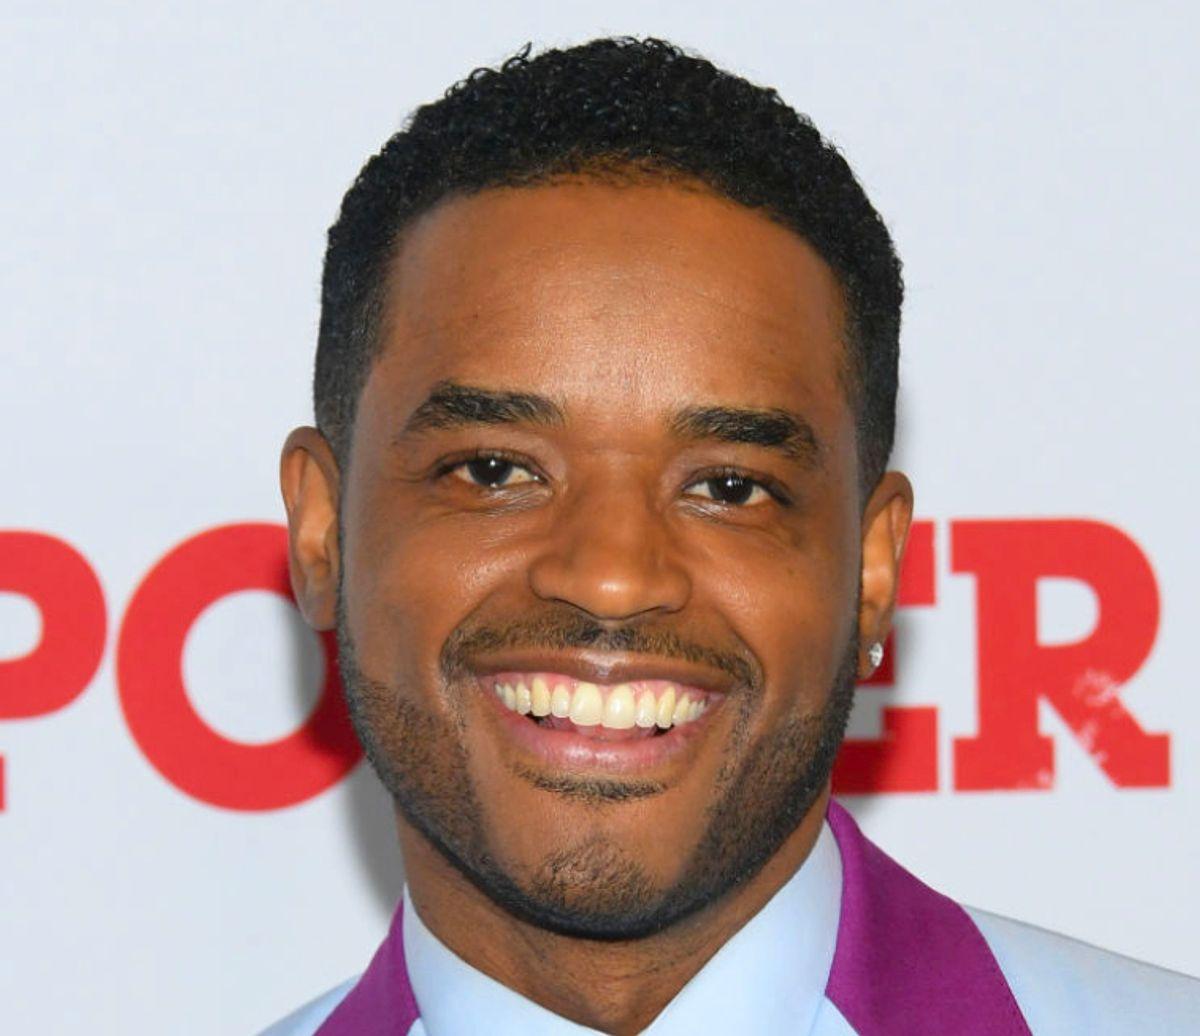 Larenz Tate Net Worth A Deeper Look at The ActorDirector's Career and Wealth